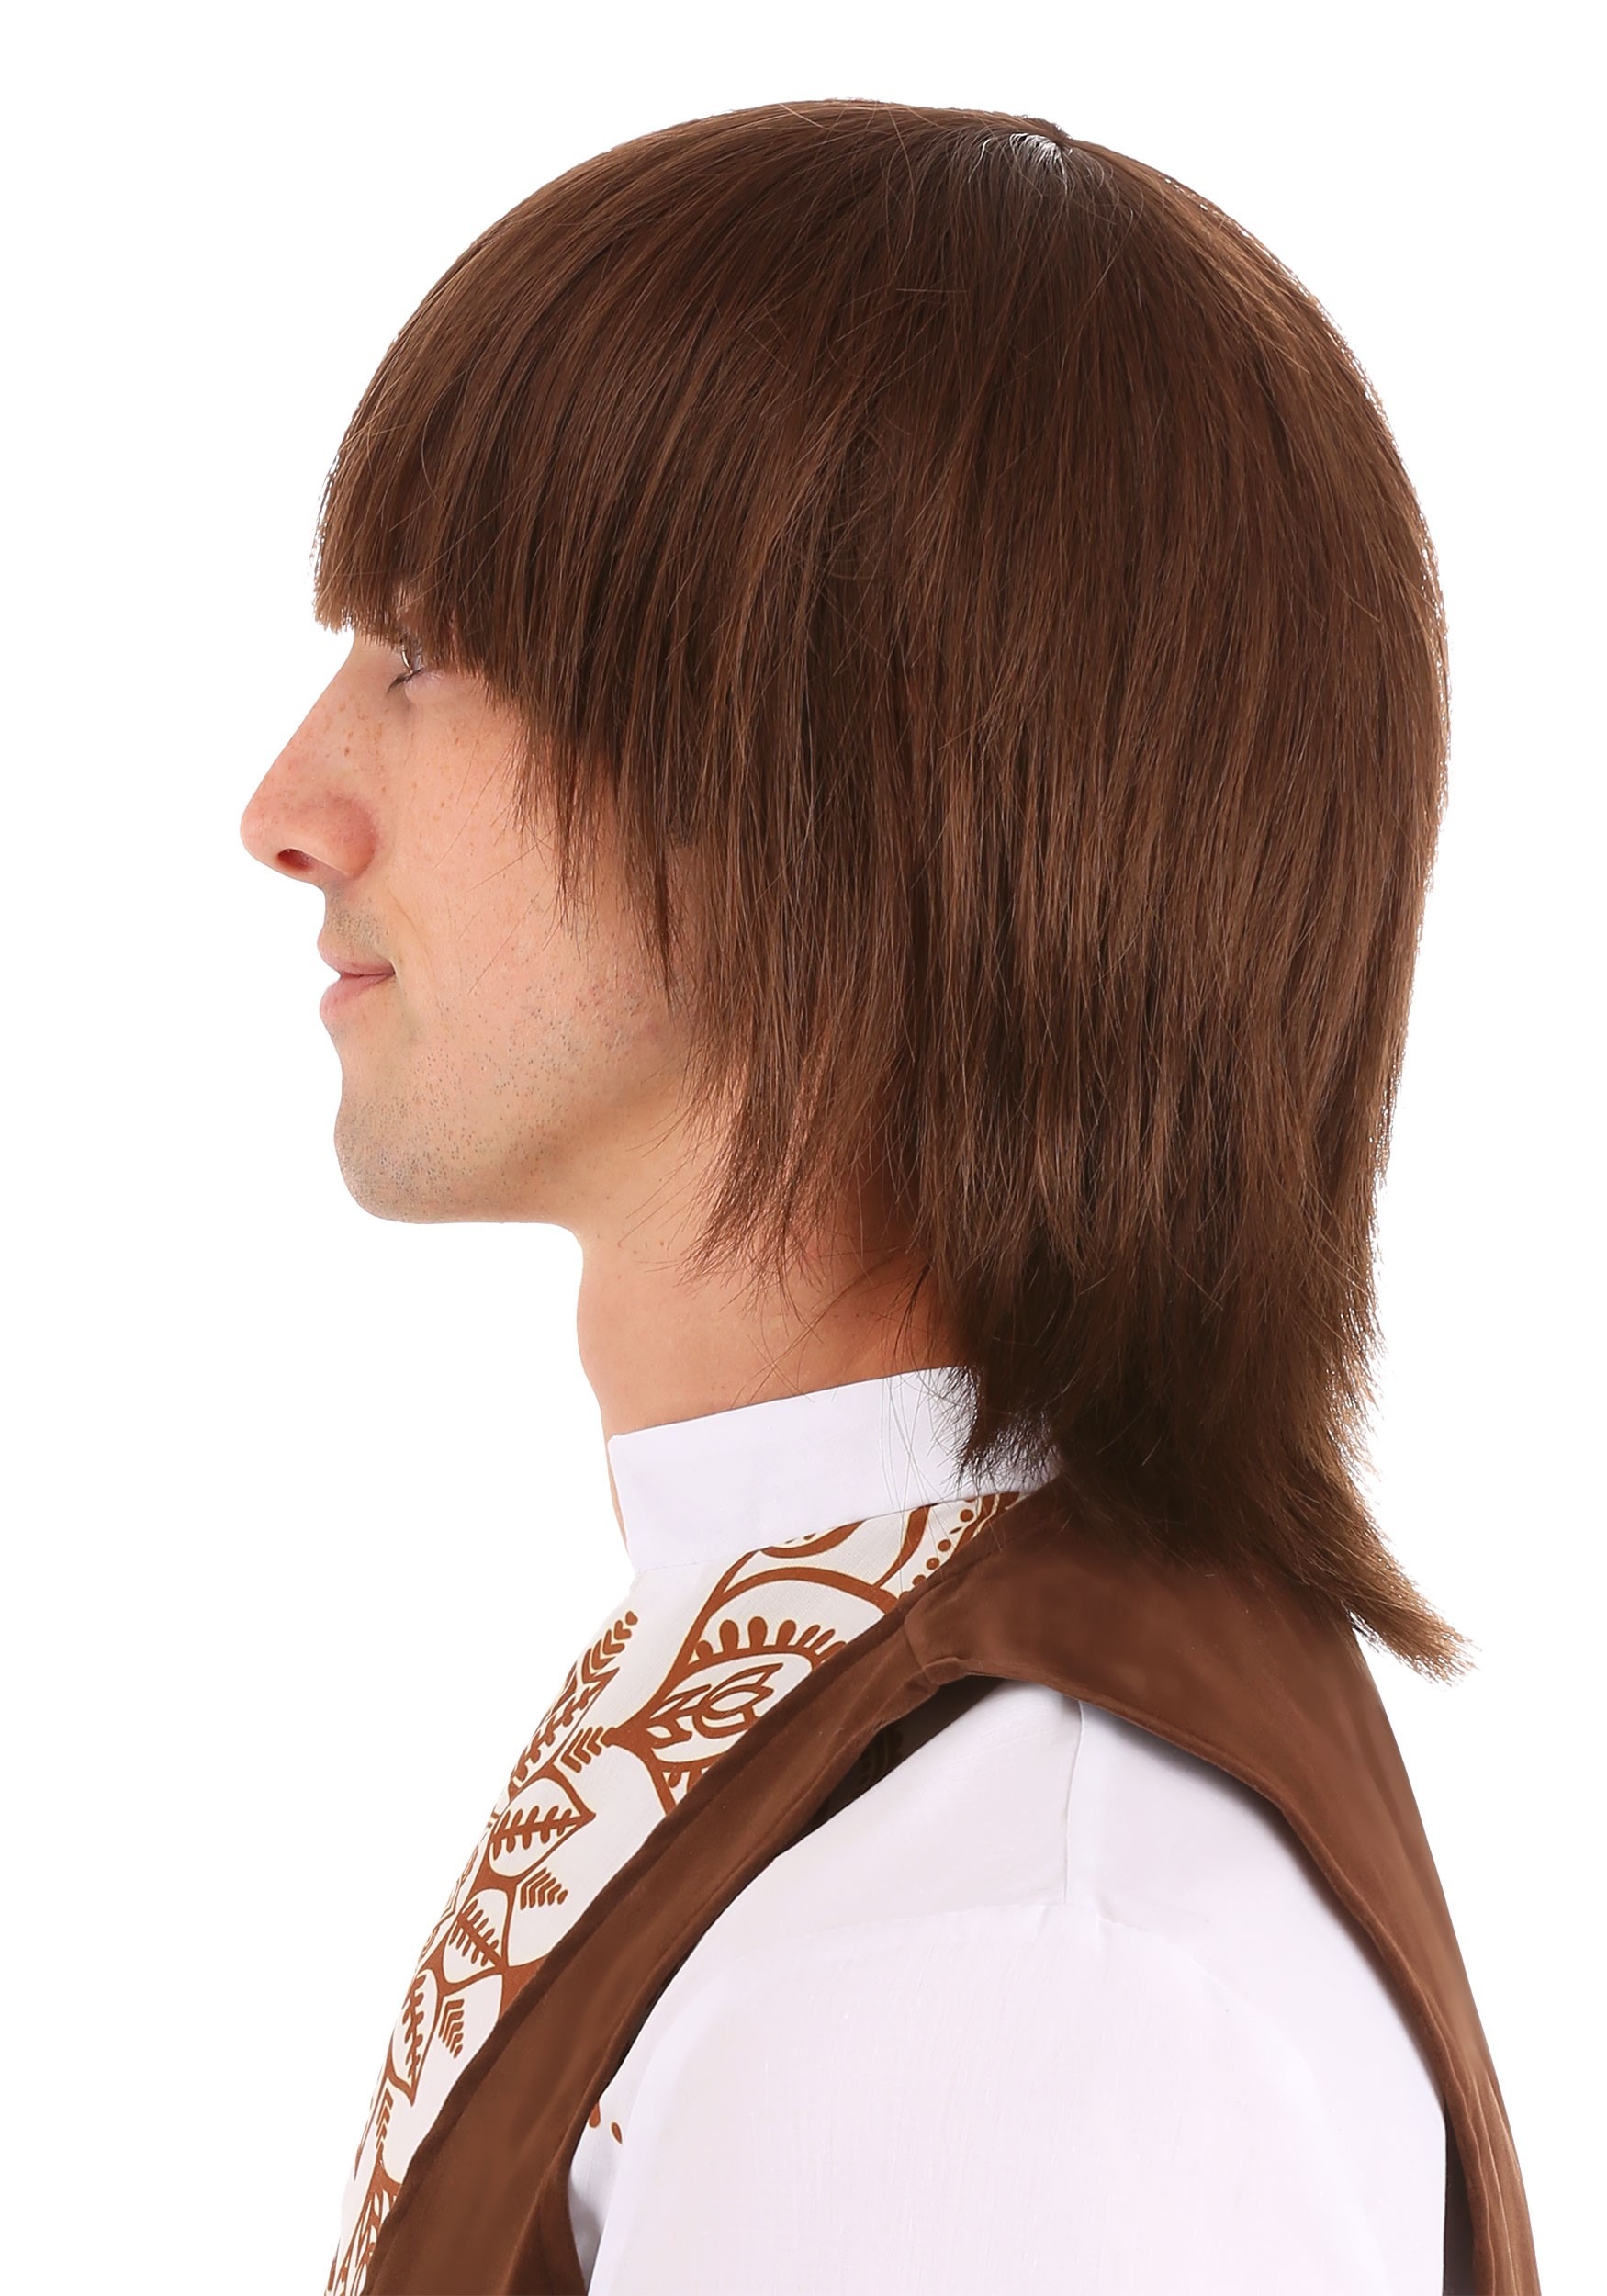 21 Popular 70s Hairstyles For Men